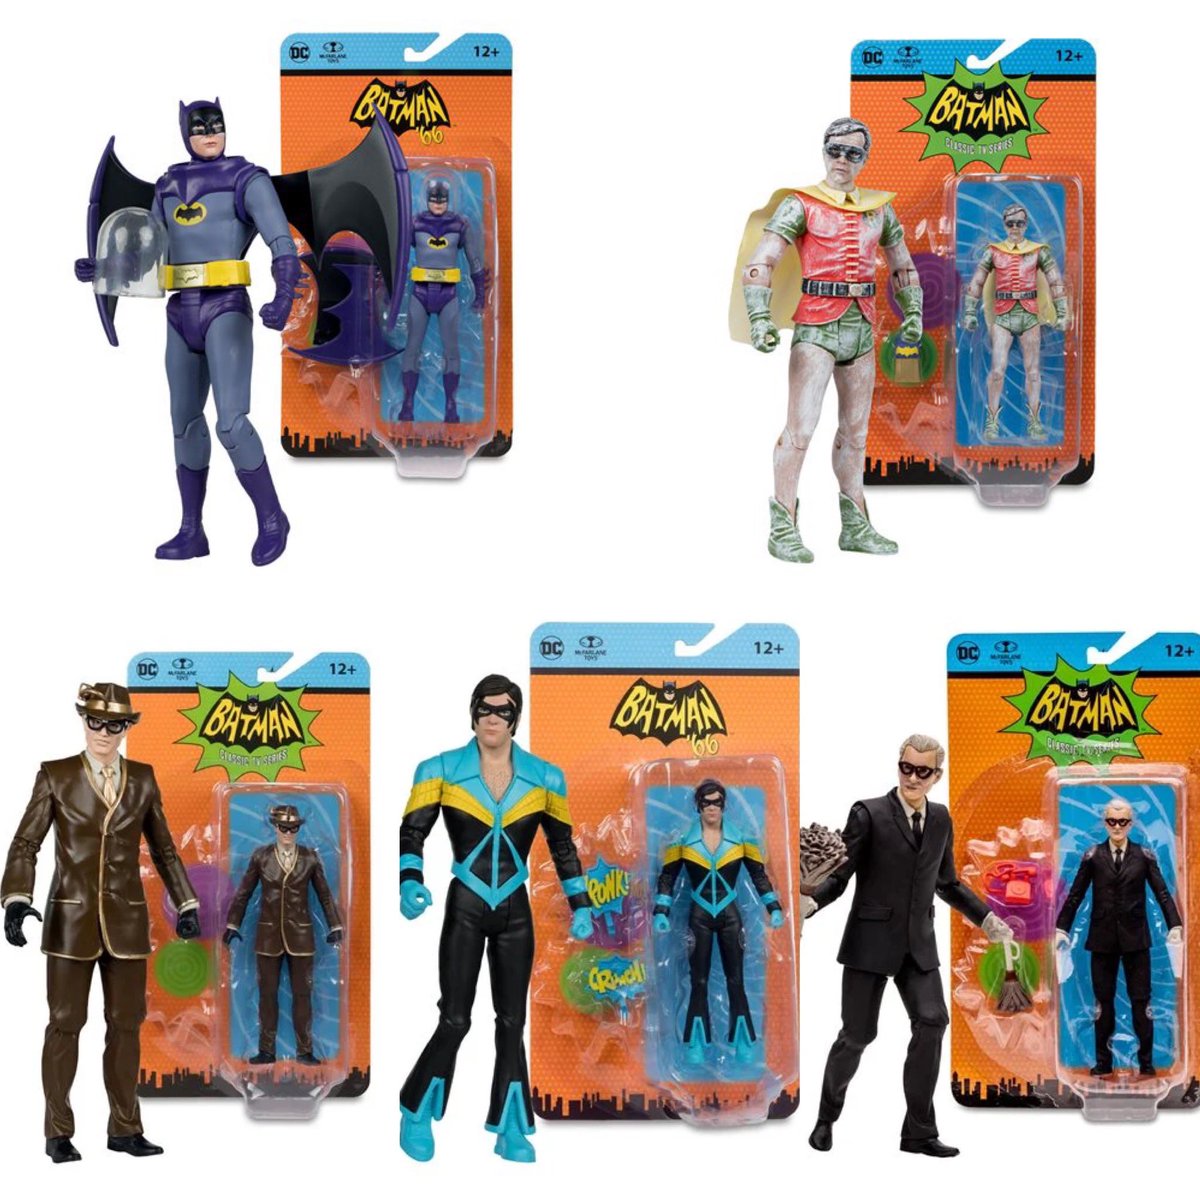 New wave of @mcfarlanetoys Batman 66 figures are up at Amazon for preorder.

amzn.to/3UAzrTz

#ad #mcfarlanetoys #batman66 #joker #thejoker #batman #dcomics #actionfigures #actionfigure #toynew #toycollector #toycommunity #inpursuitoftoys